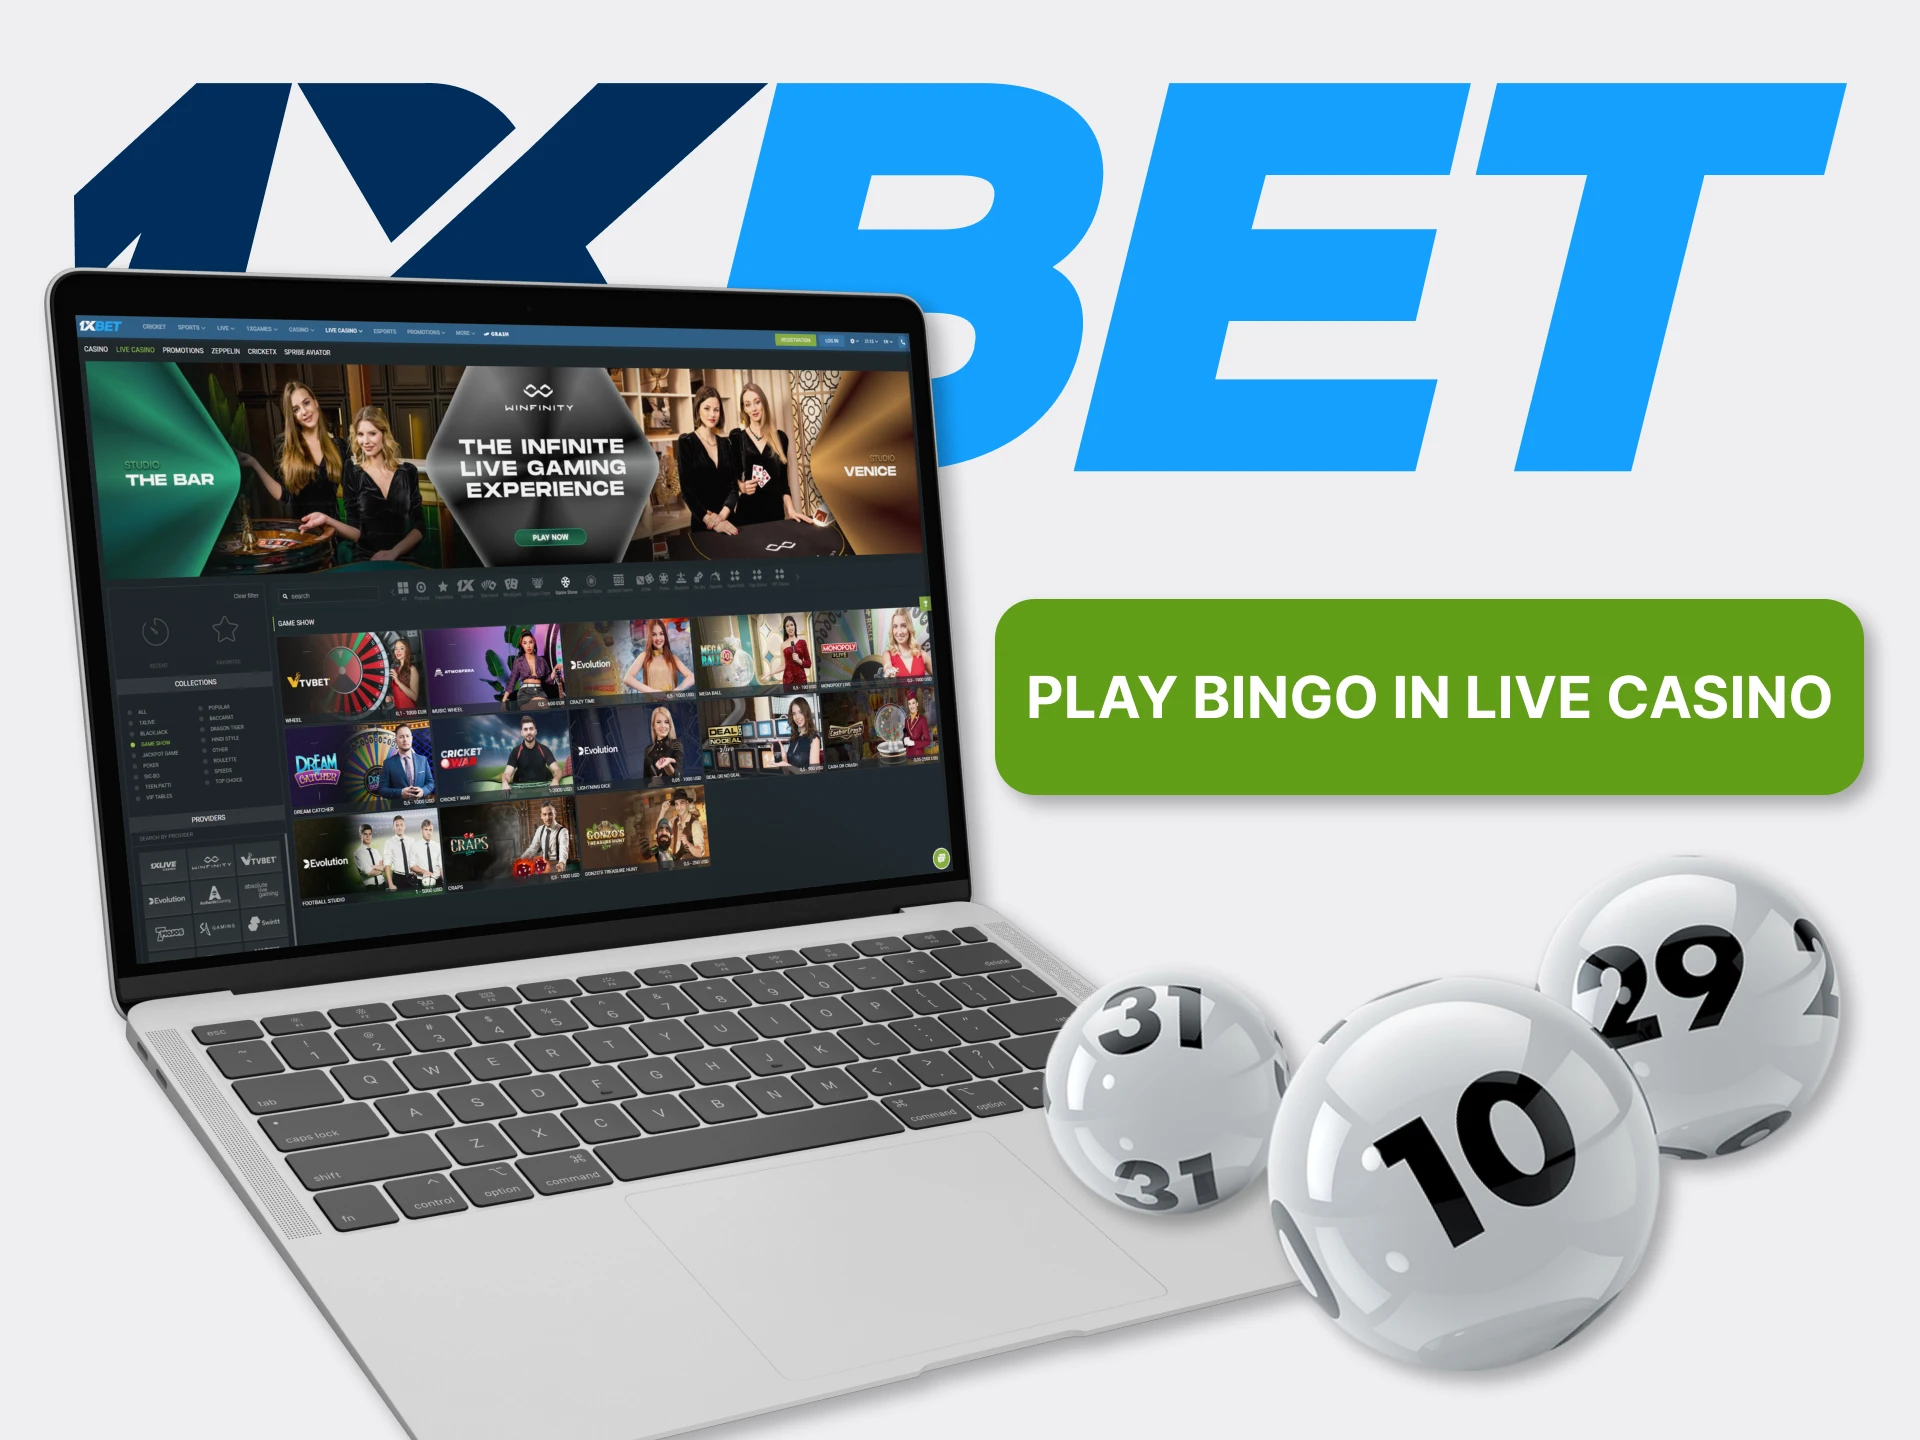 With 1xBet play bingo in the Live Casino section too.